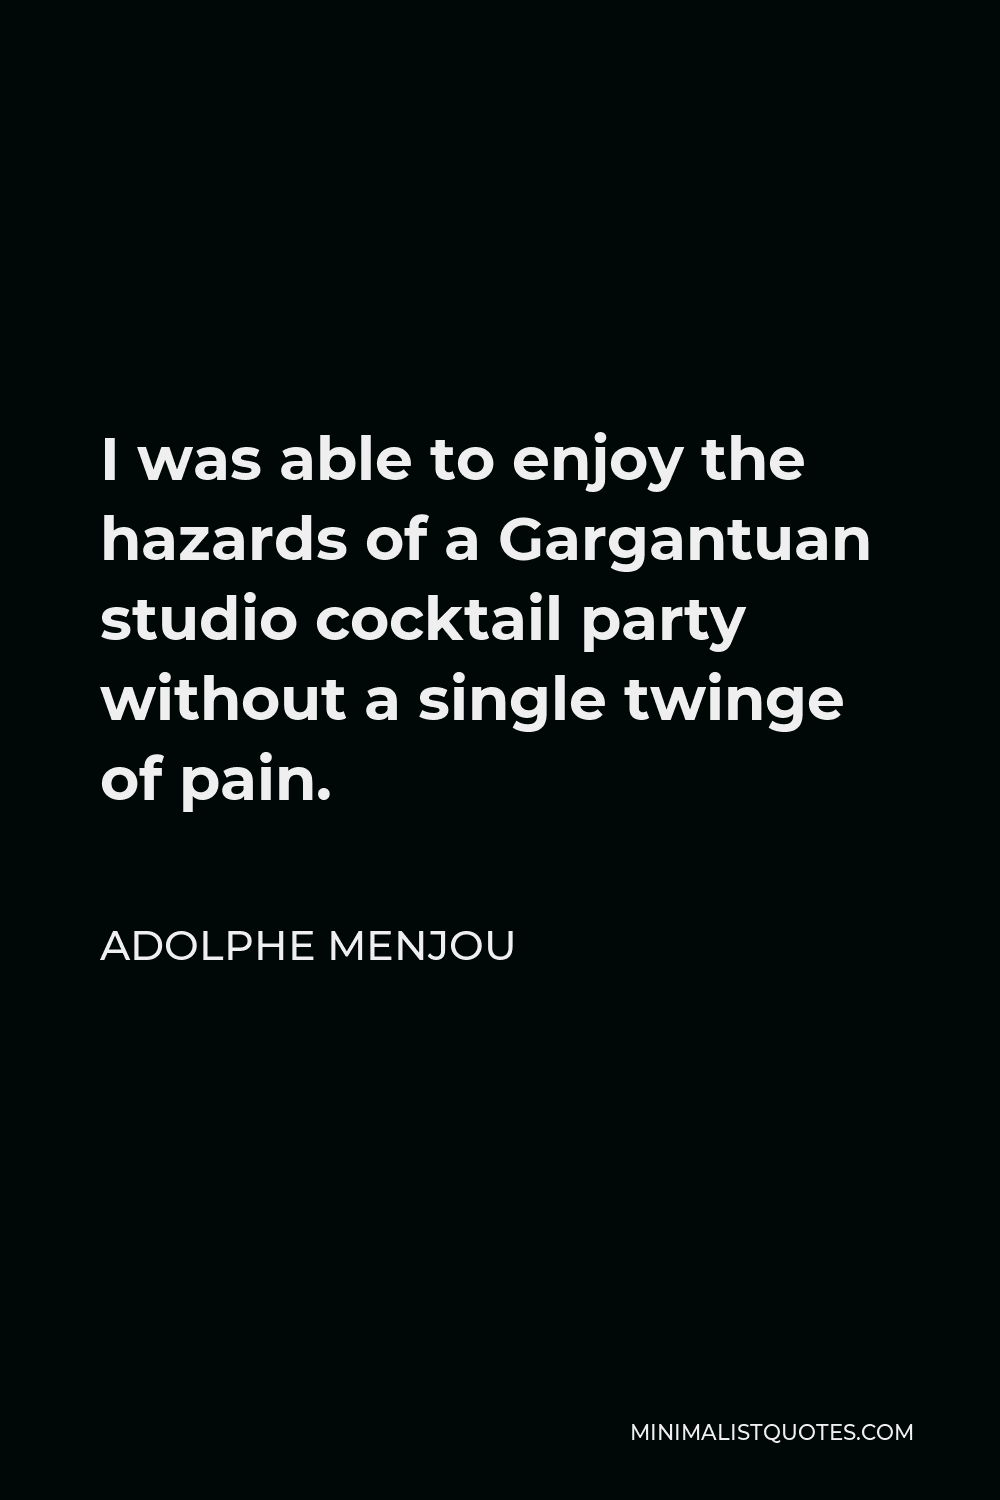 Adolphe Menjou Quote - I was able to enjoy the hazards of a Gargantuan studio cocktail party without a single twinge of pain.